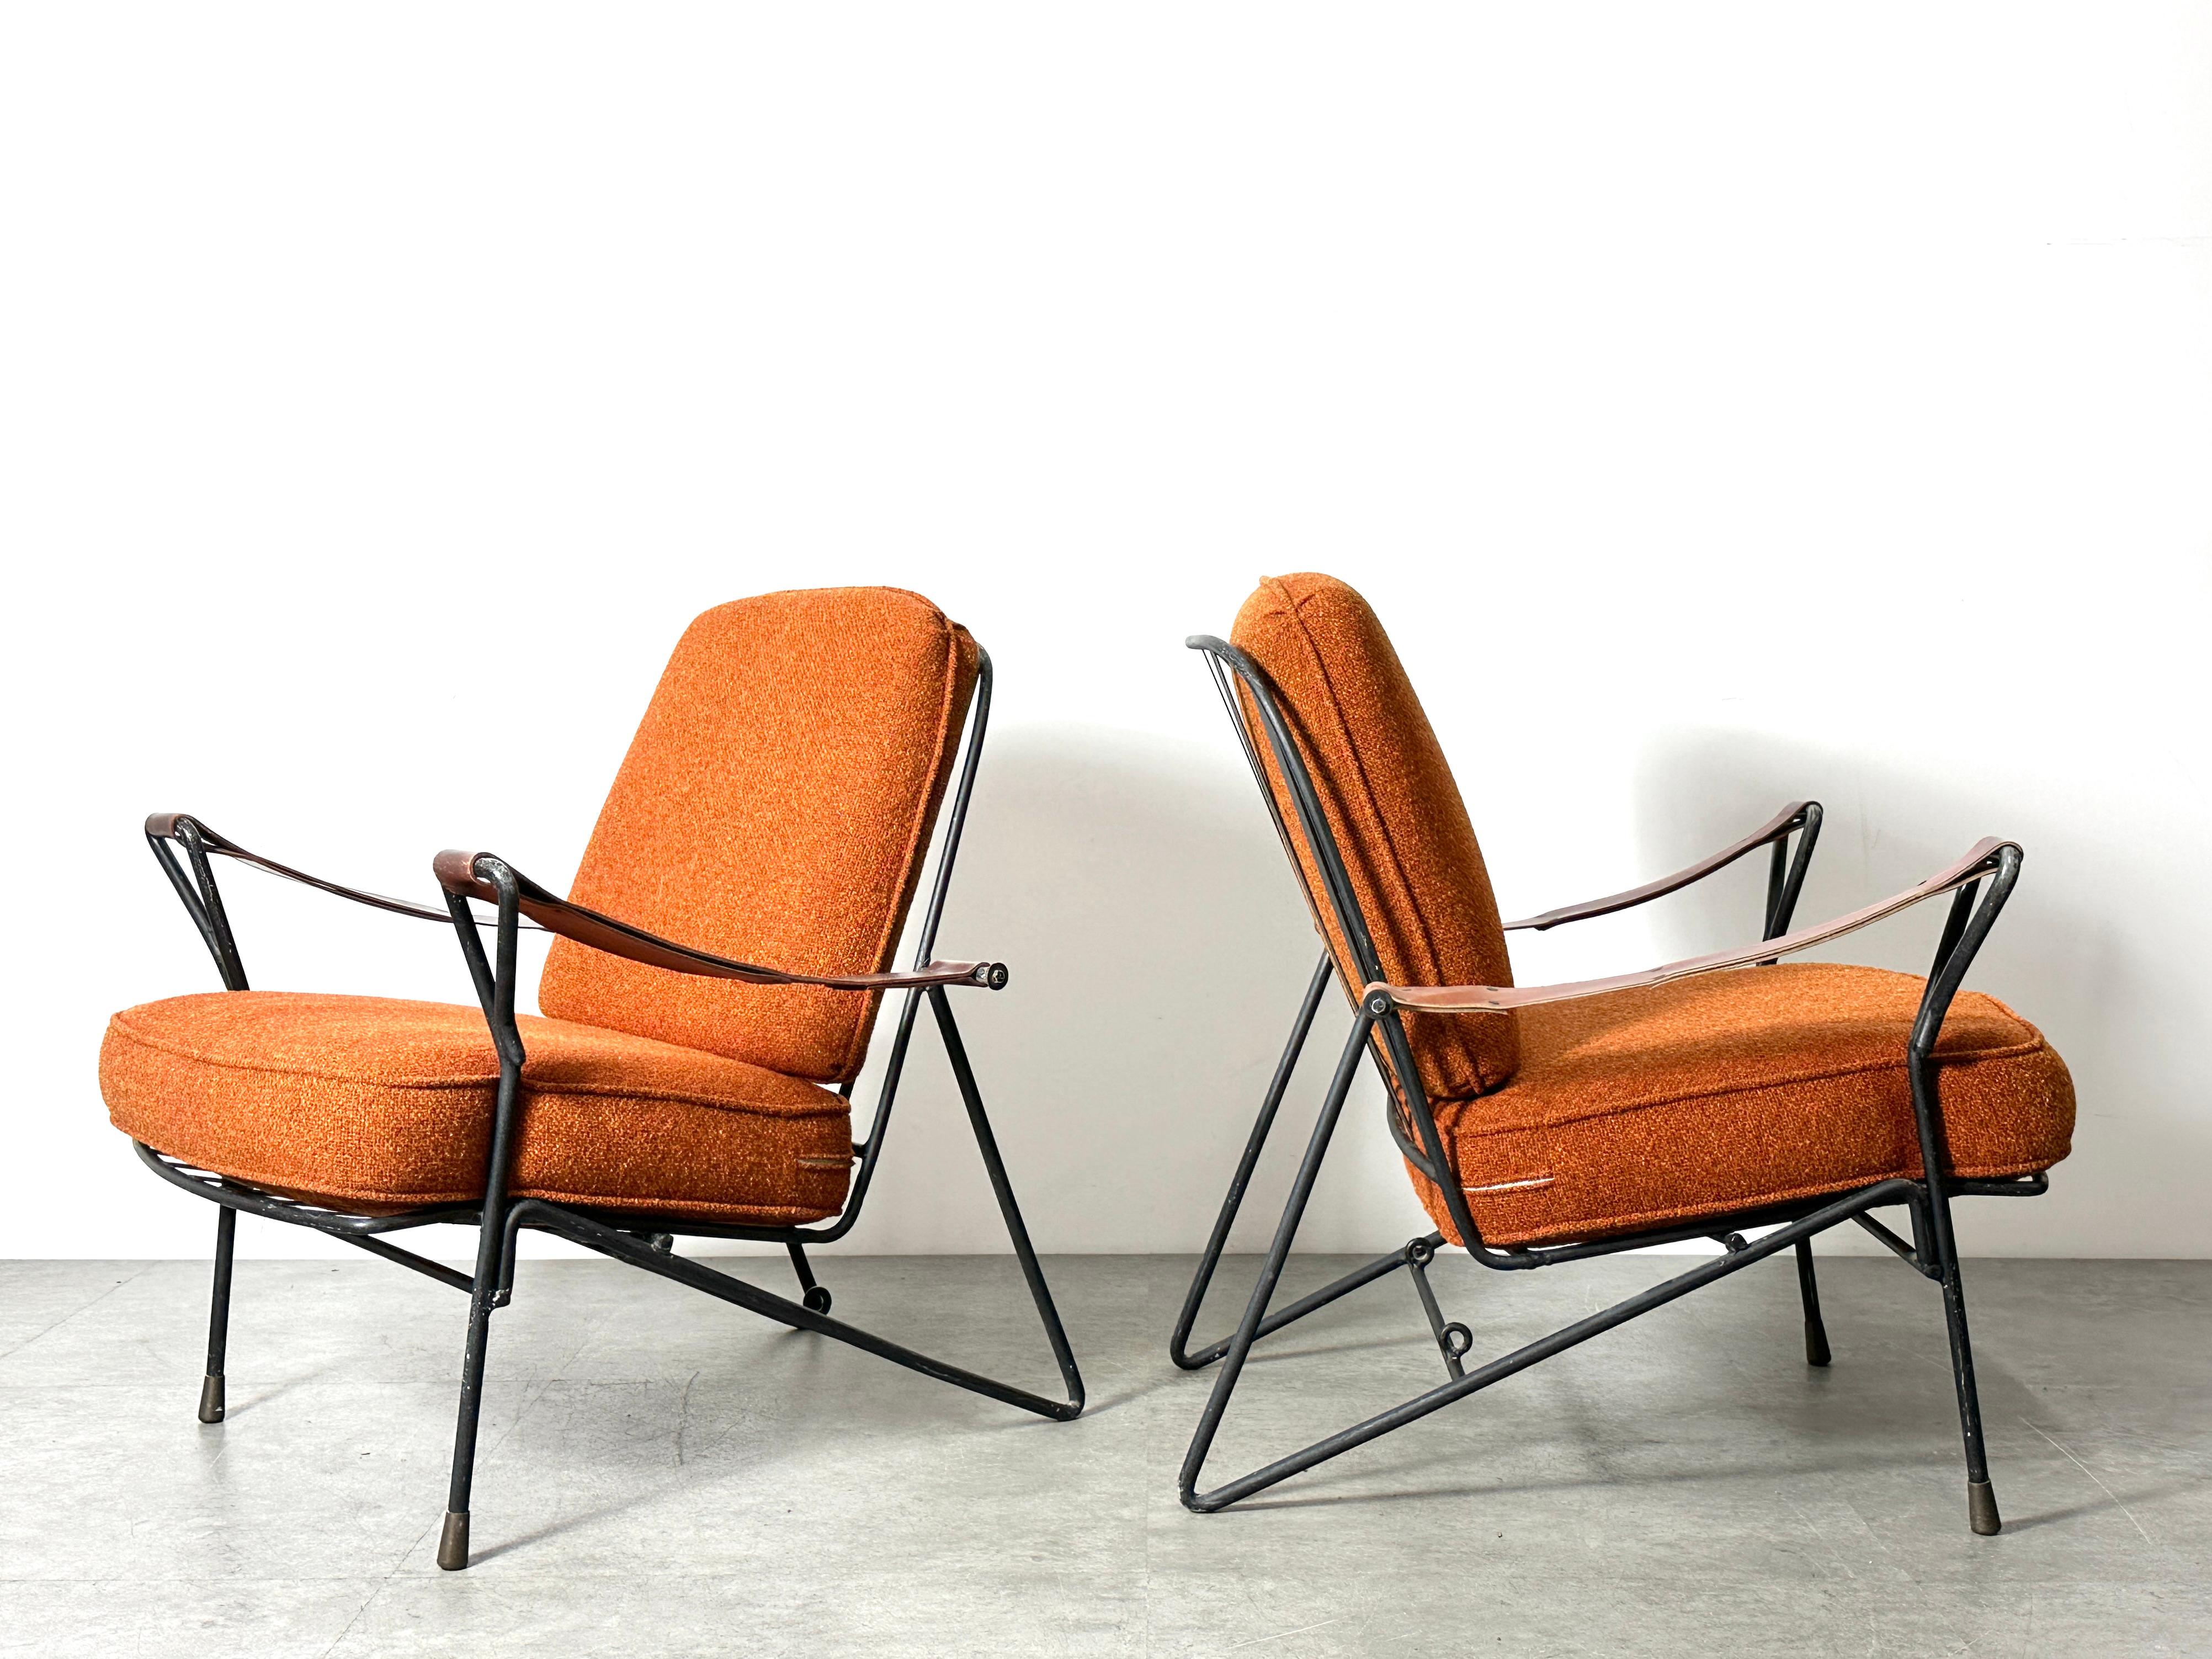 A pair of modernist Mexican lounge chairs circa 1950s
Enameled iron frames / leather strap sling armrests / brass capped feet
Loose cushions in a rust orange